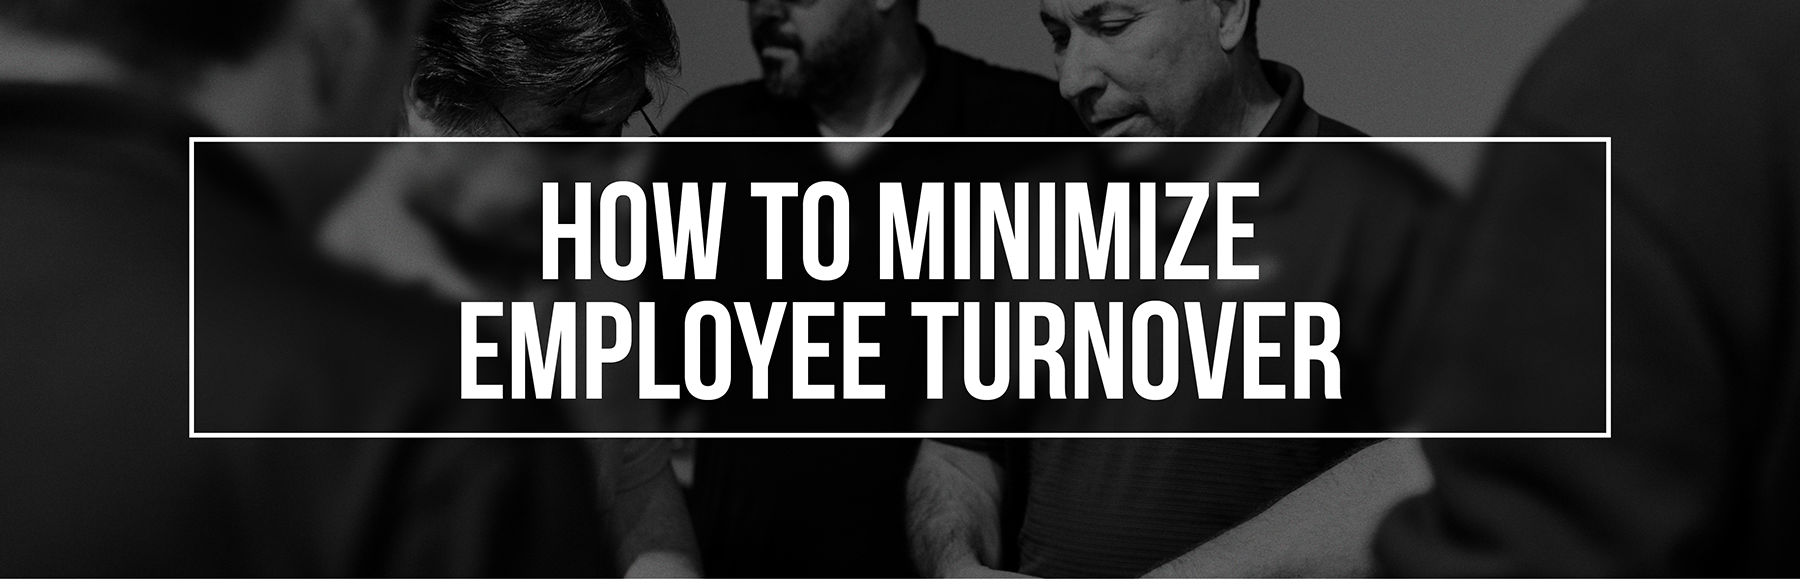 how-to-minimize-employee-turnover